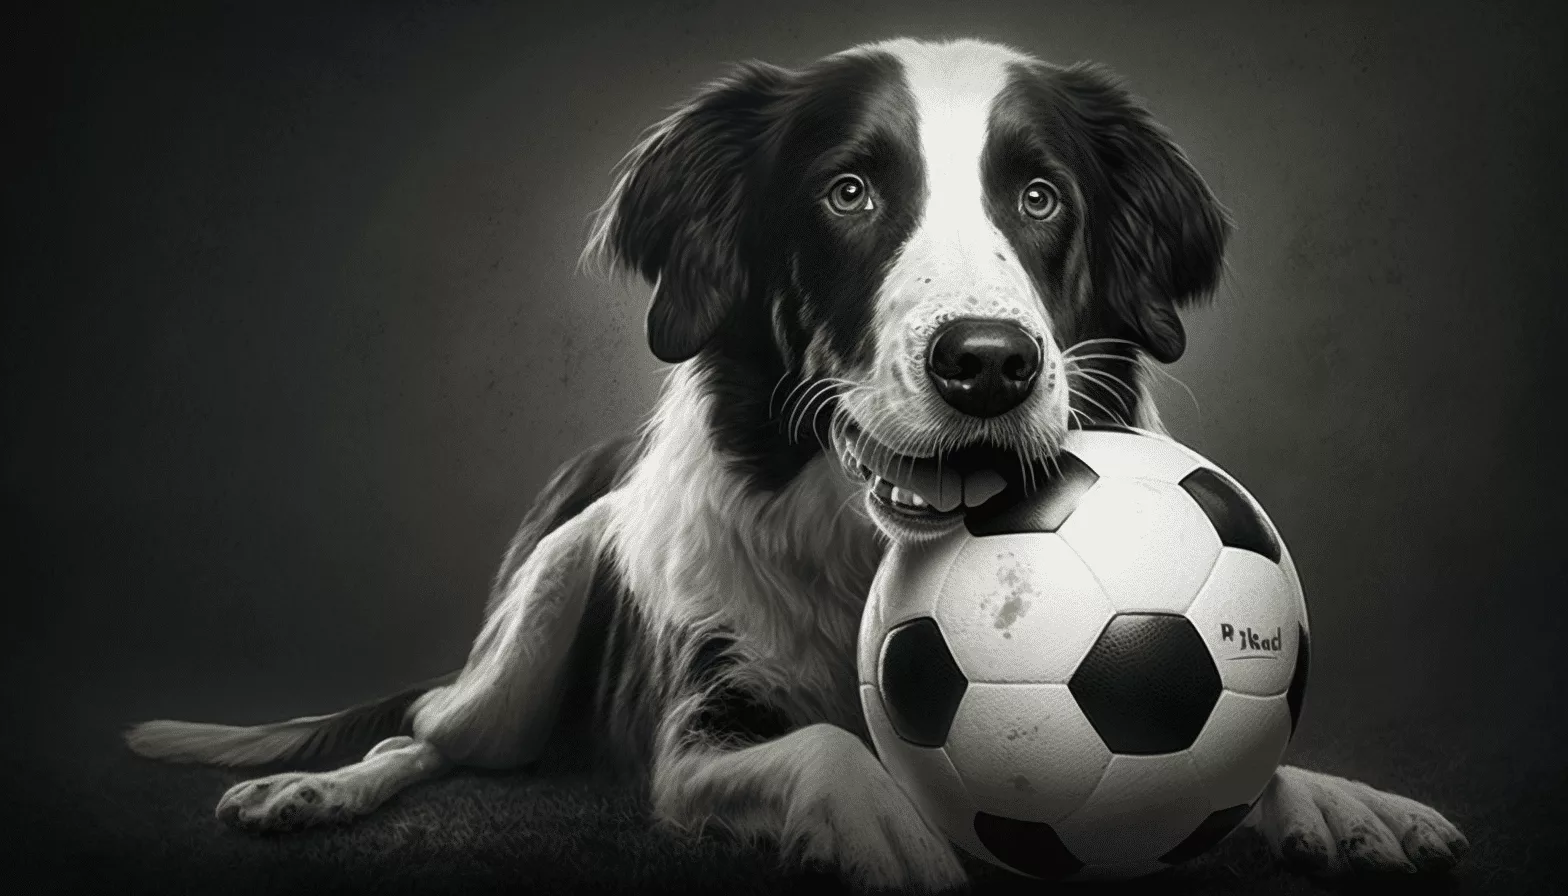 A dog is holding a soccer ball.